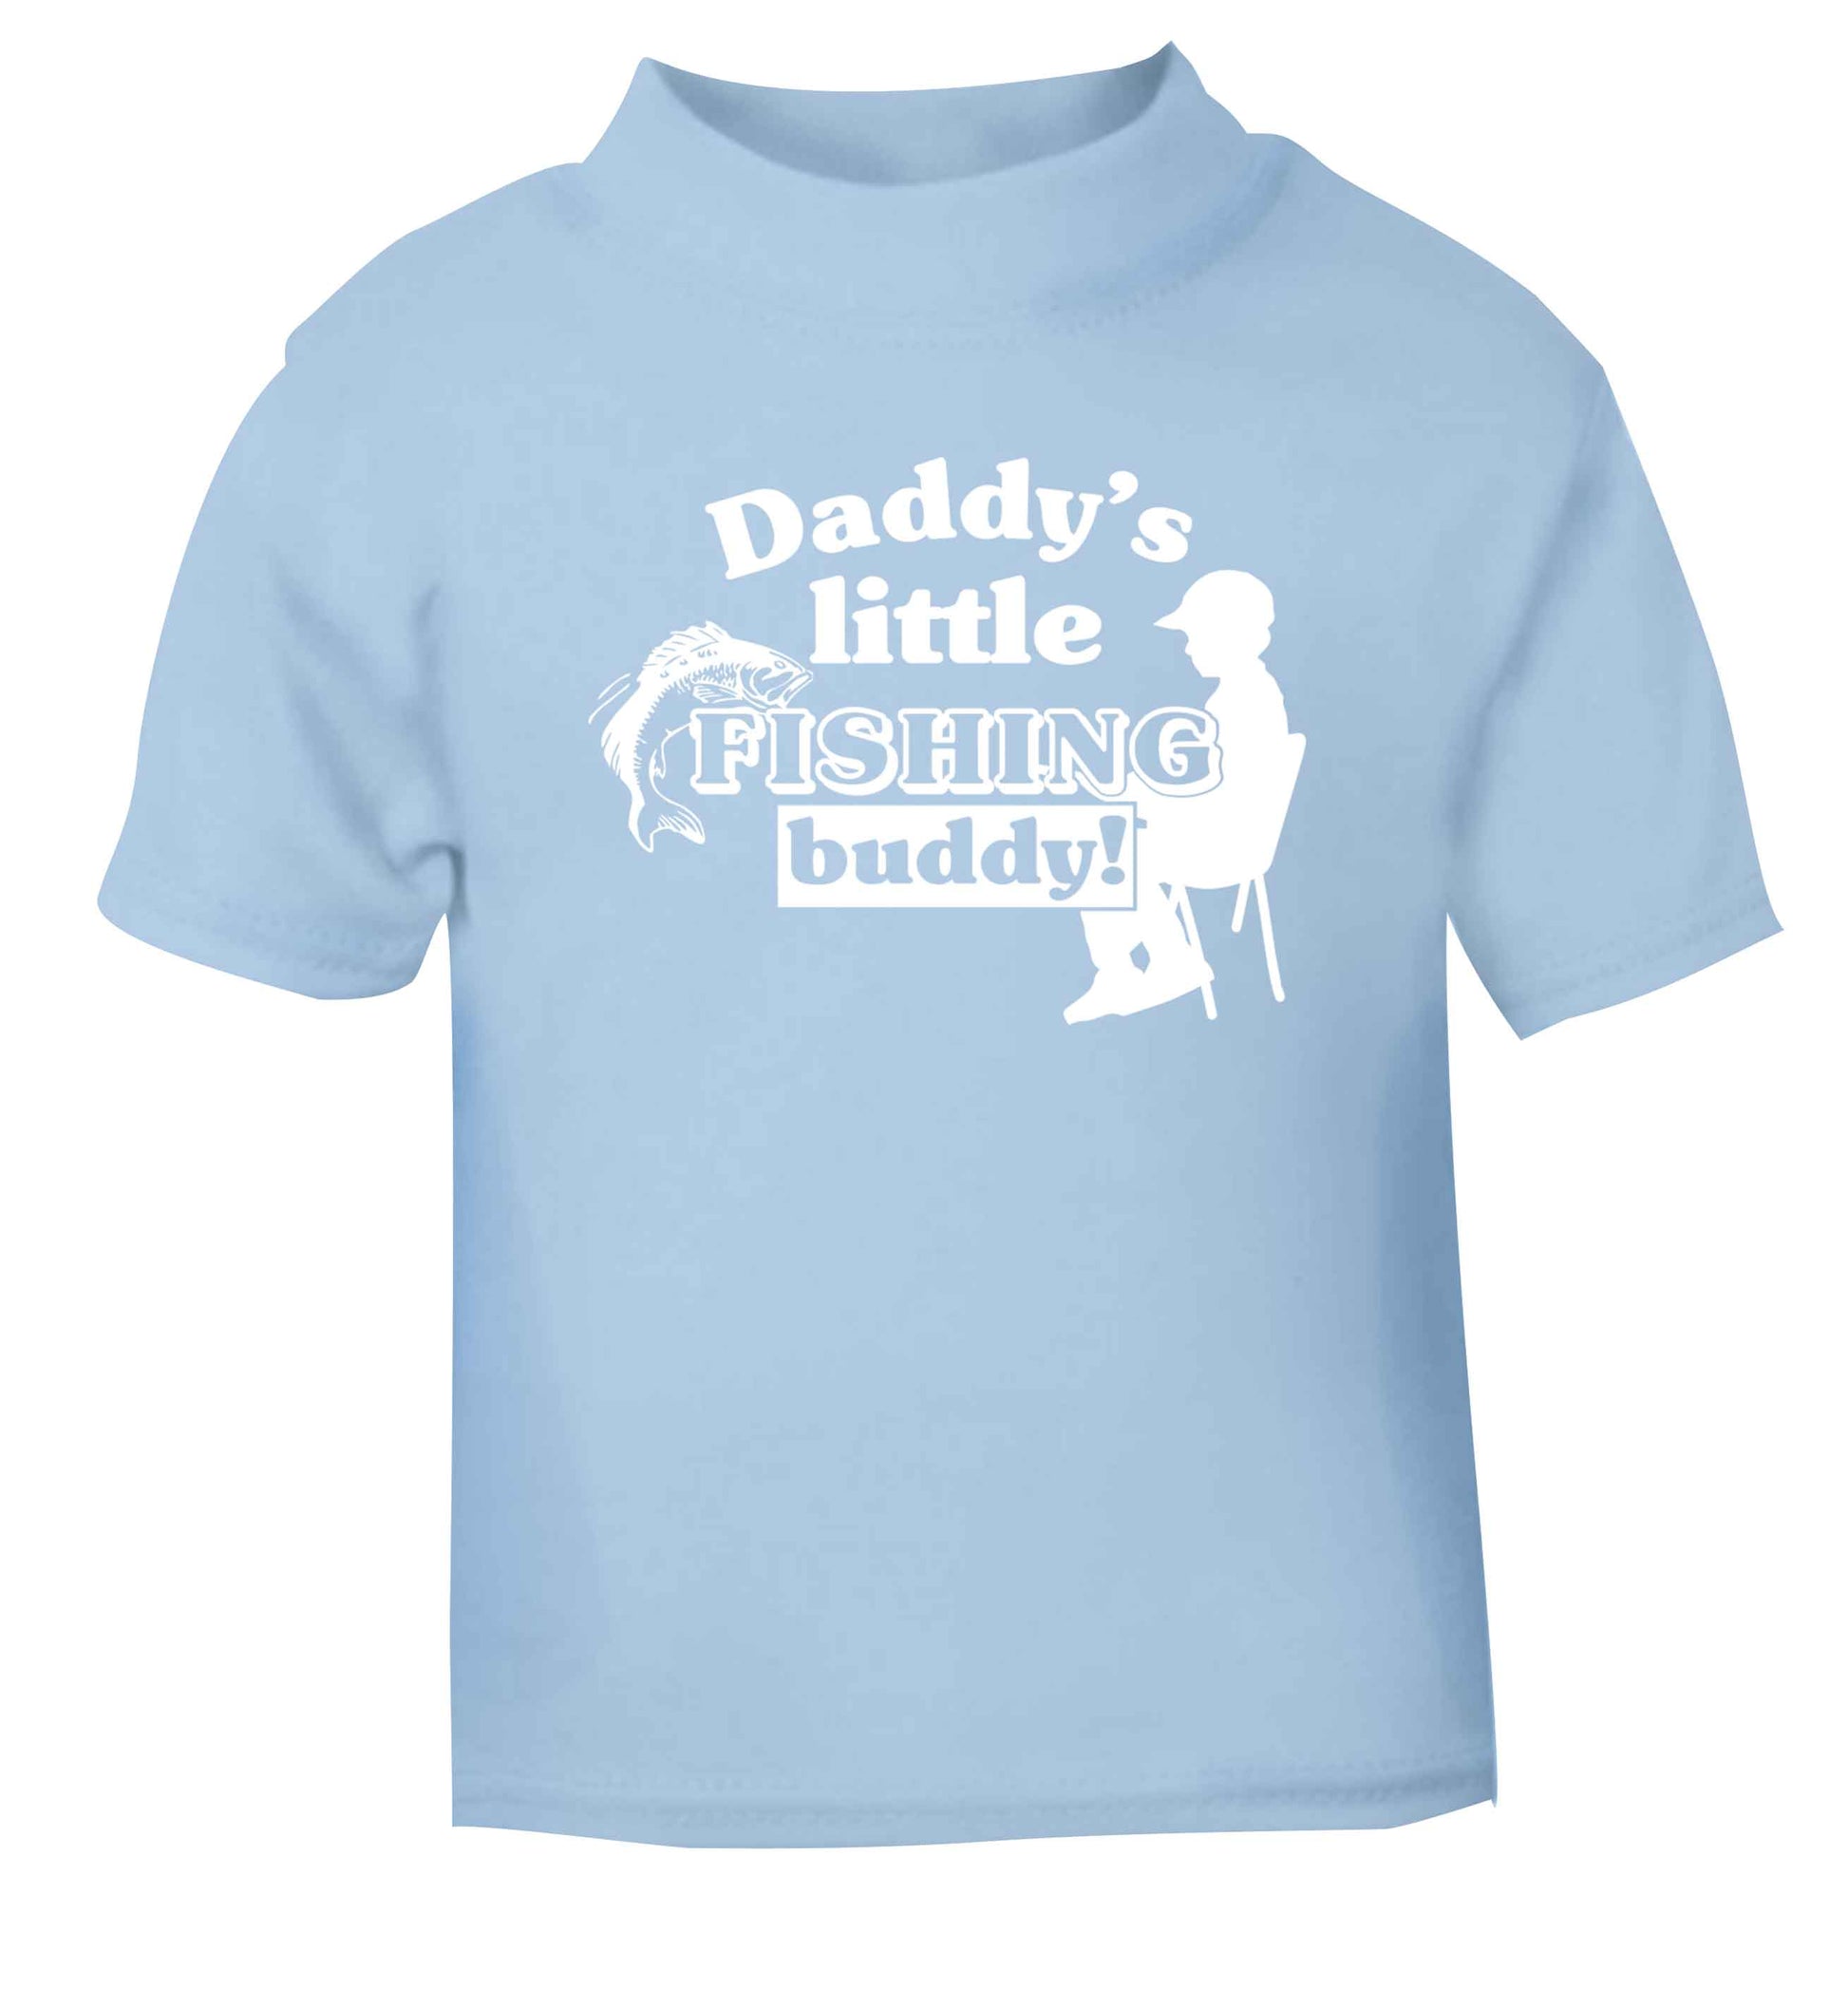 Daddy's little fishing buddy light blue Baby Toddler Tshirt 2 Years